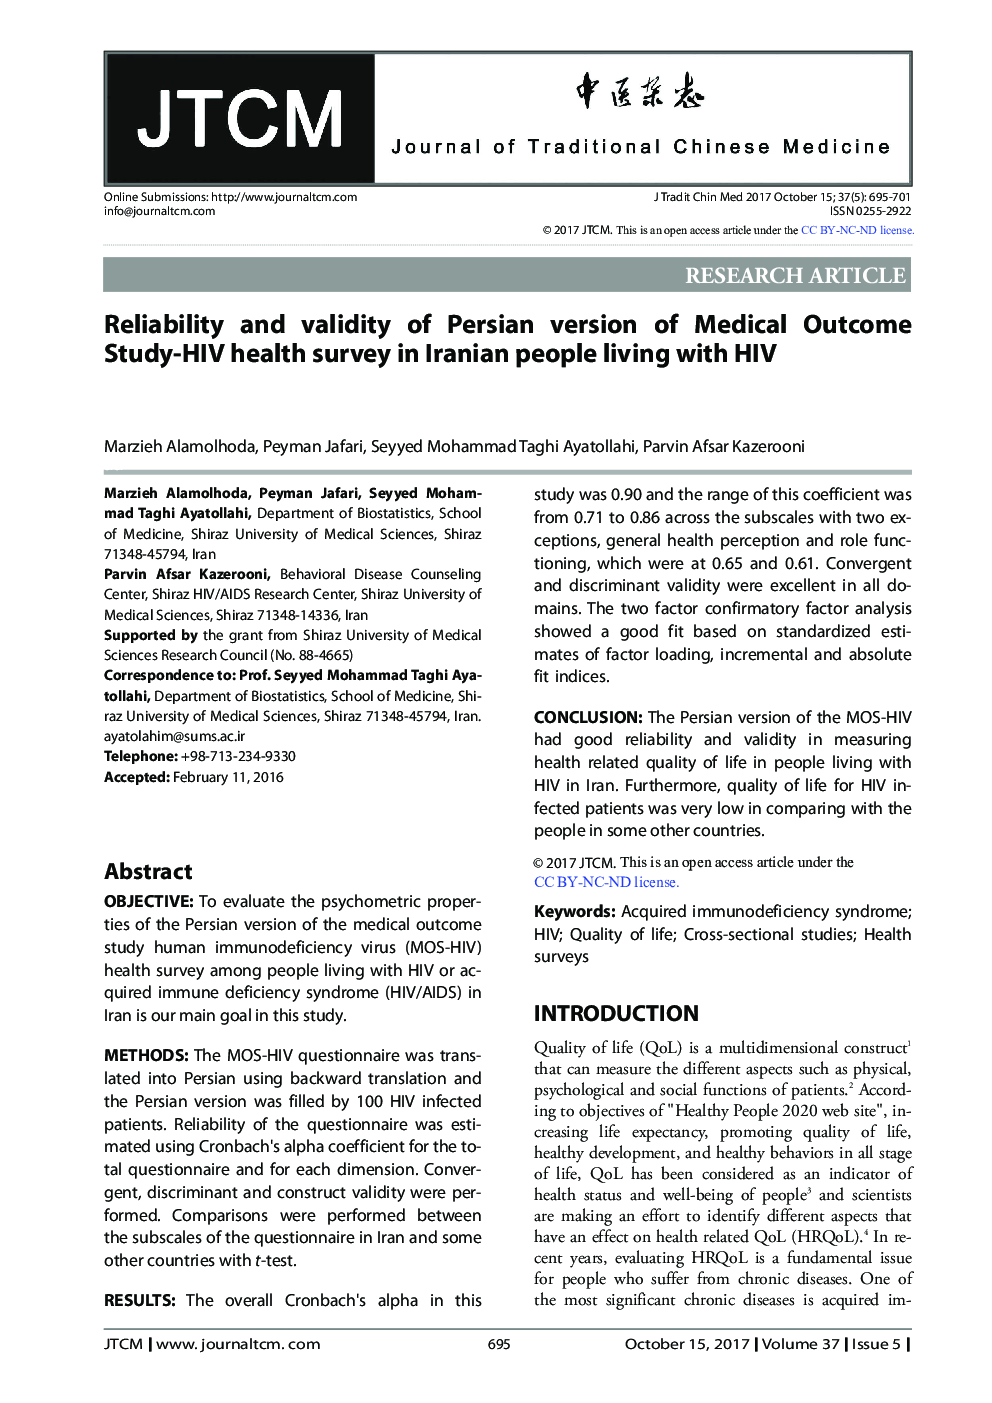 Reliability and validity of Persian version of Medical Outcome Study-HIV health survey in Iranian people living with HIV